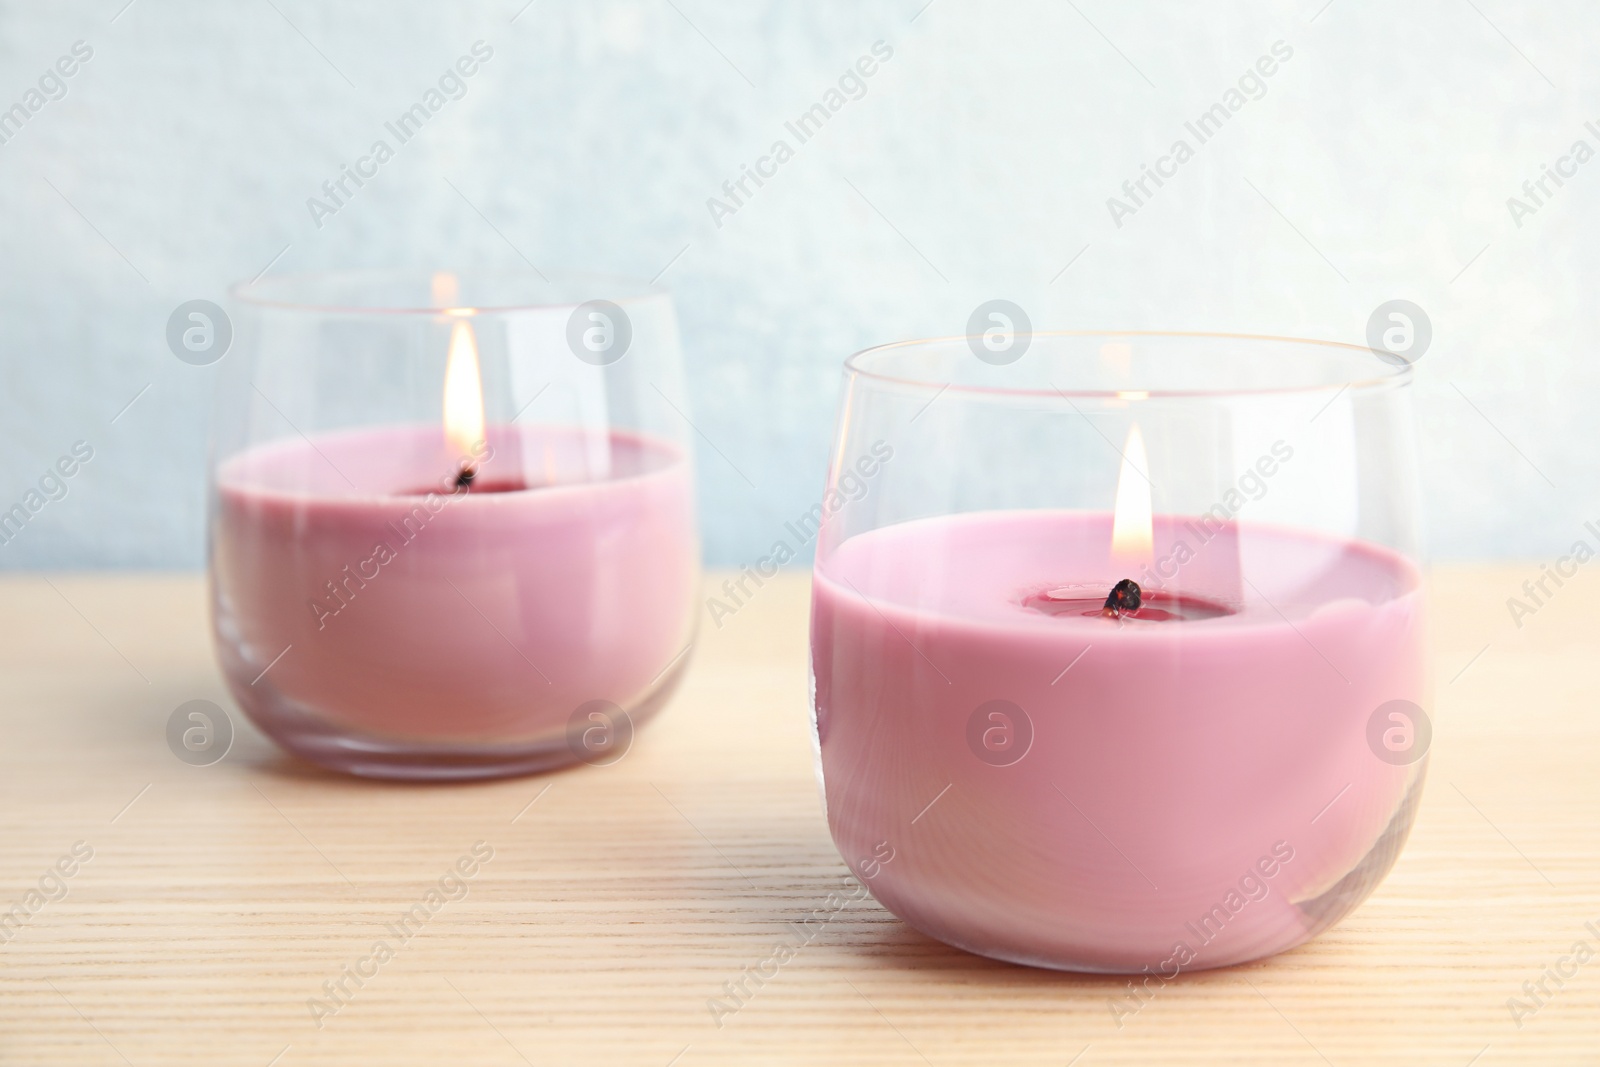 Photo of Burning wax candles in glass holders on wooden table